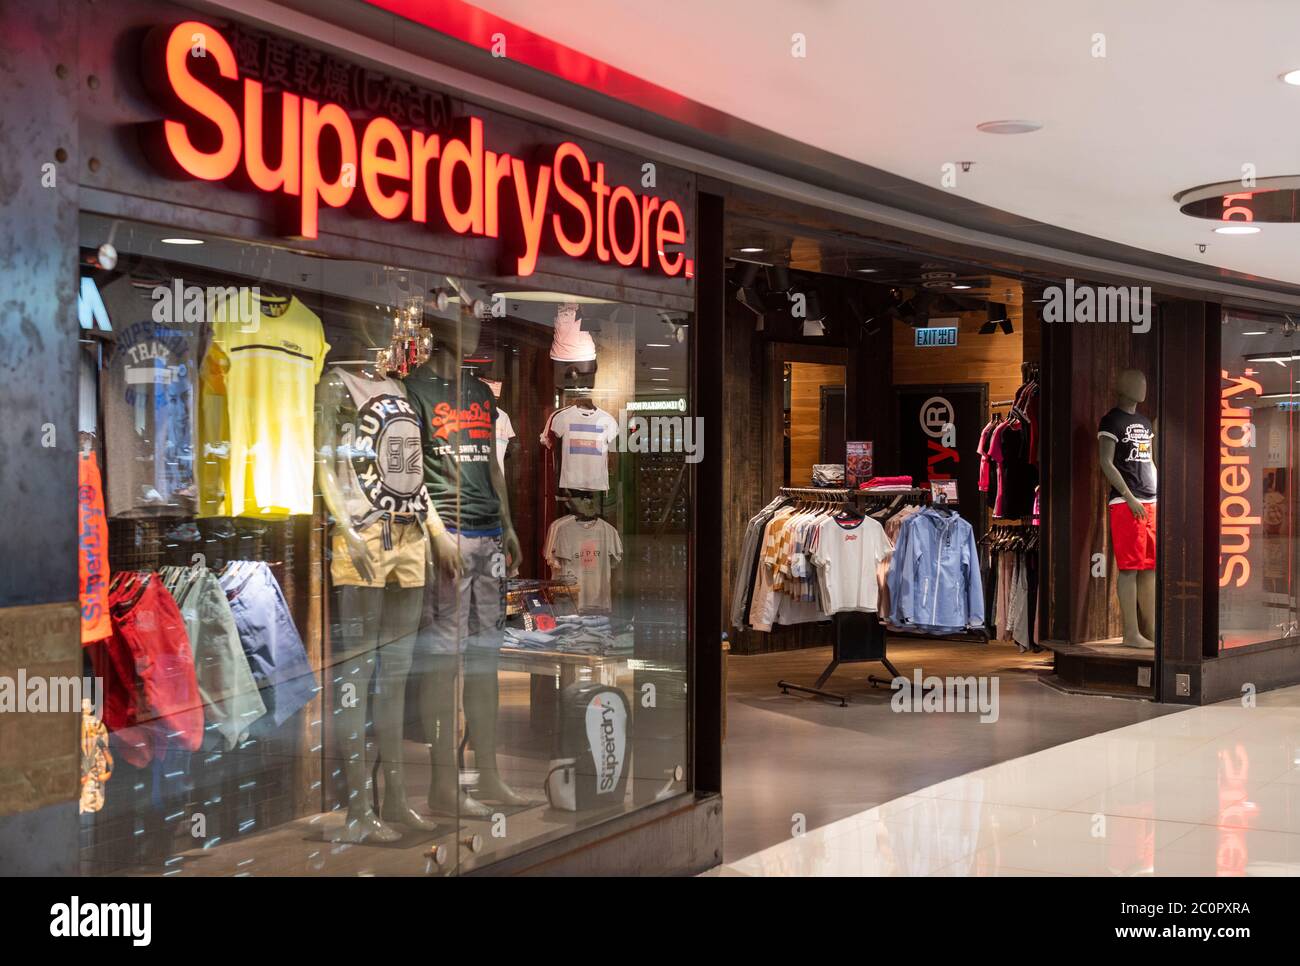 British clothing brand Superdry store and logo seen in Hong Kong Stock  Photo - Alamy